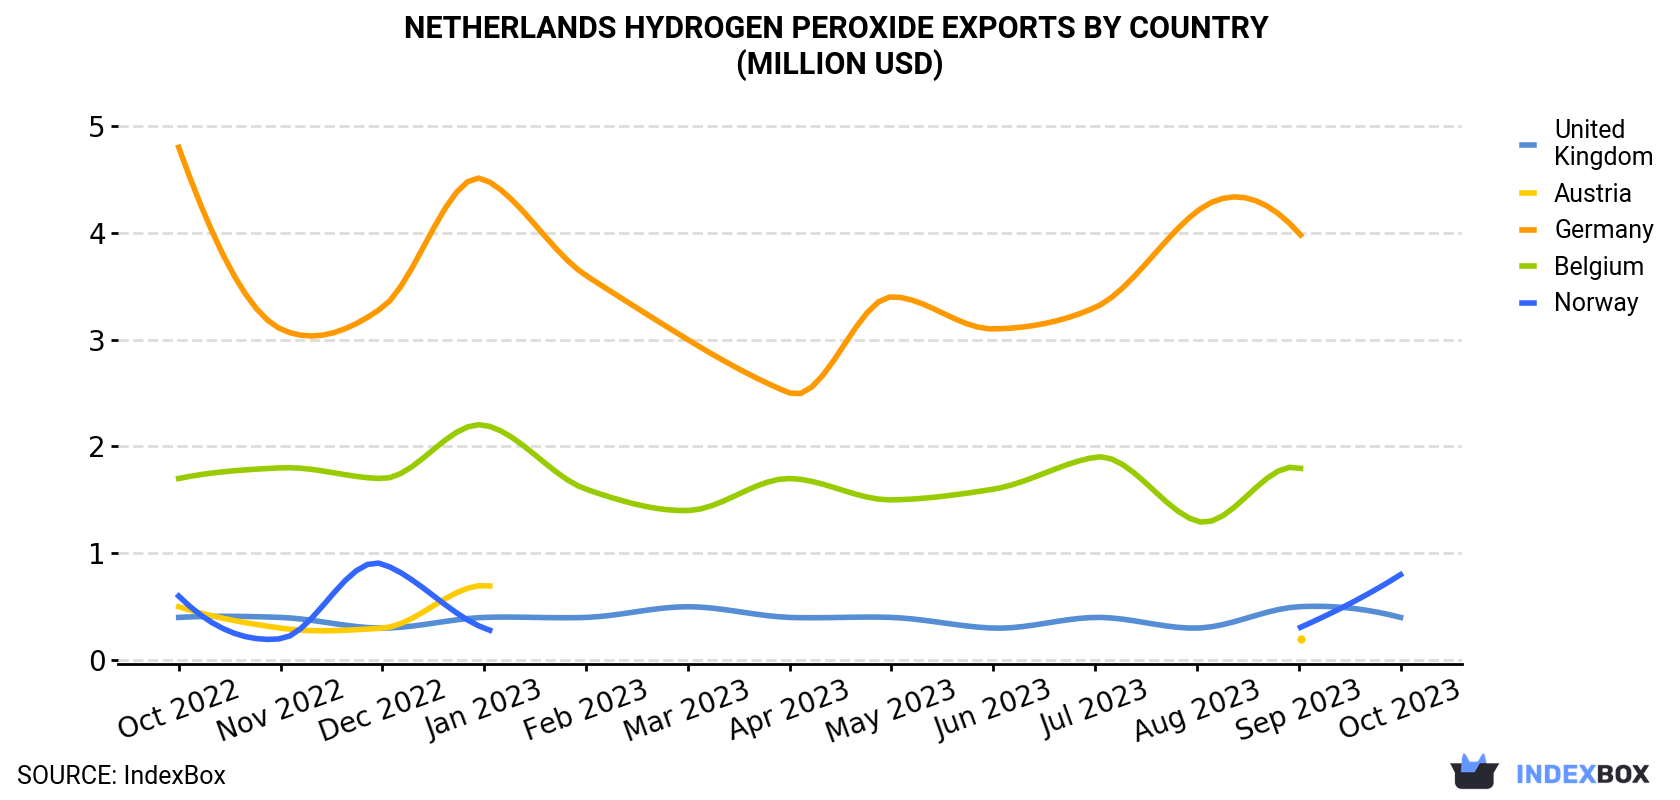 Netherlands Hydrogen Peroxide Exports By Country (Million USD)